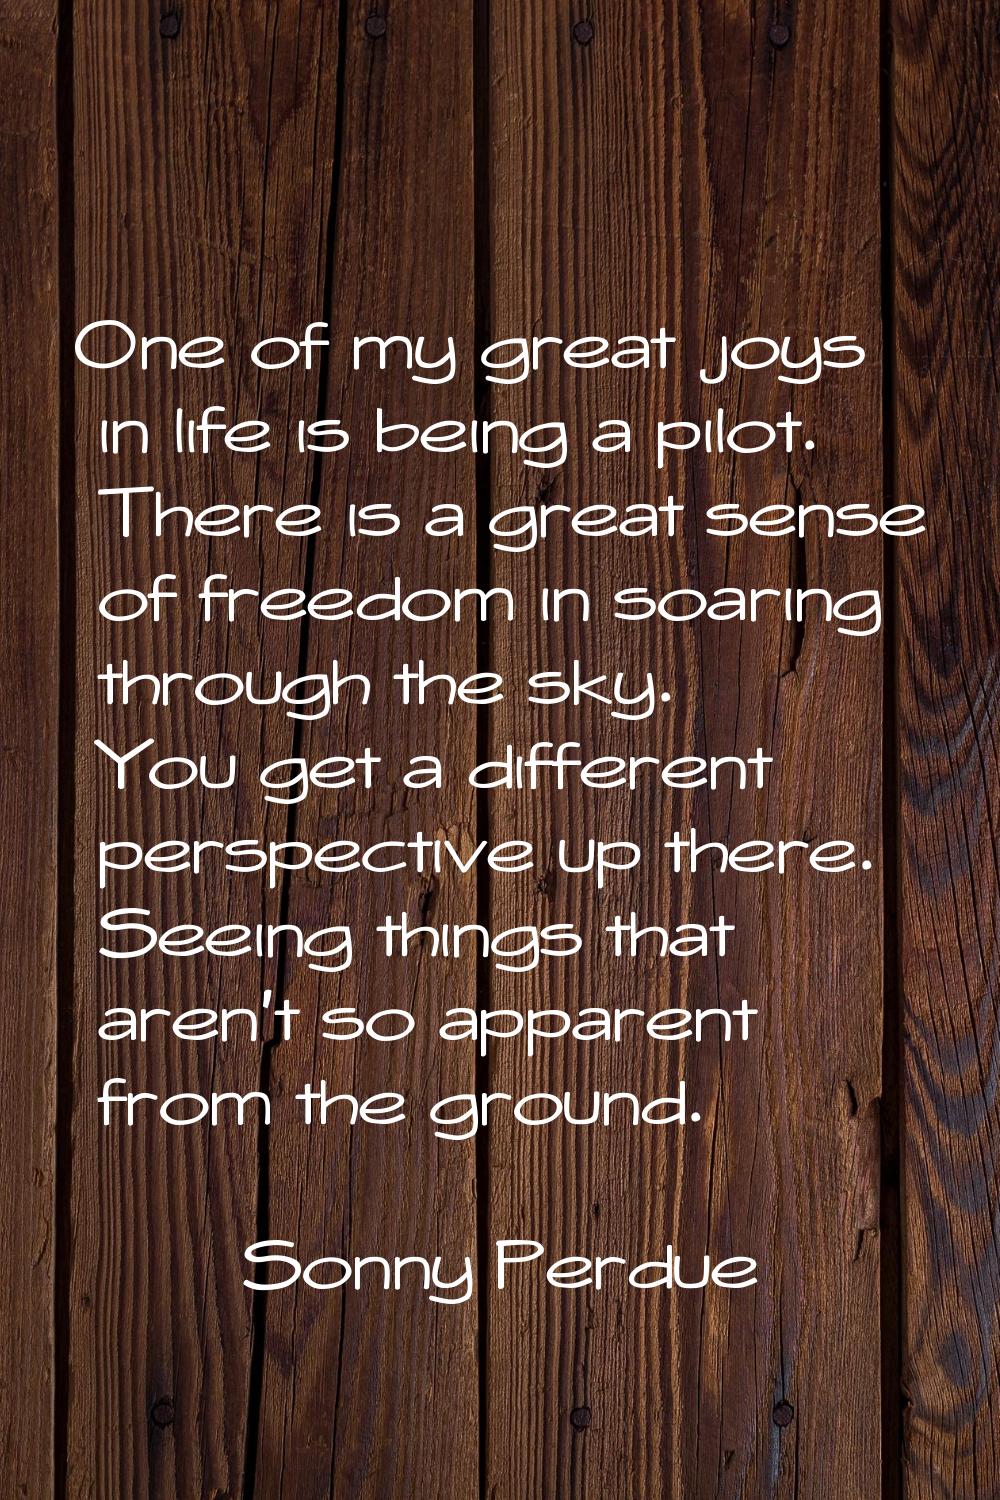 One of my great joys in life is being a pilot. There is a great sense of freedom in soaring through